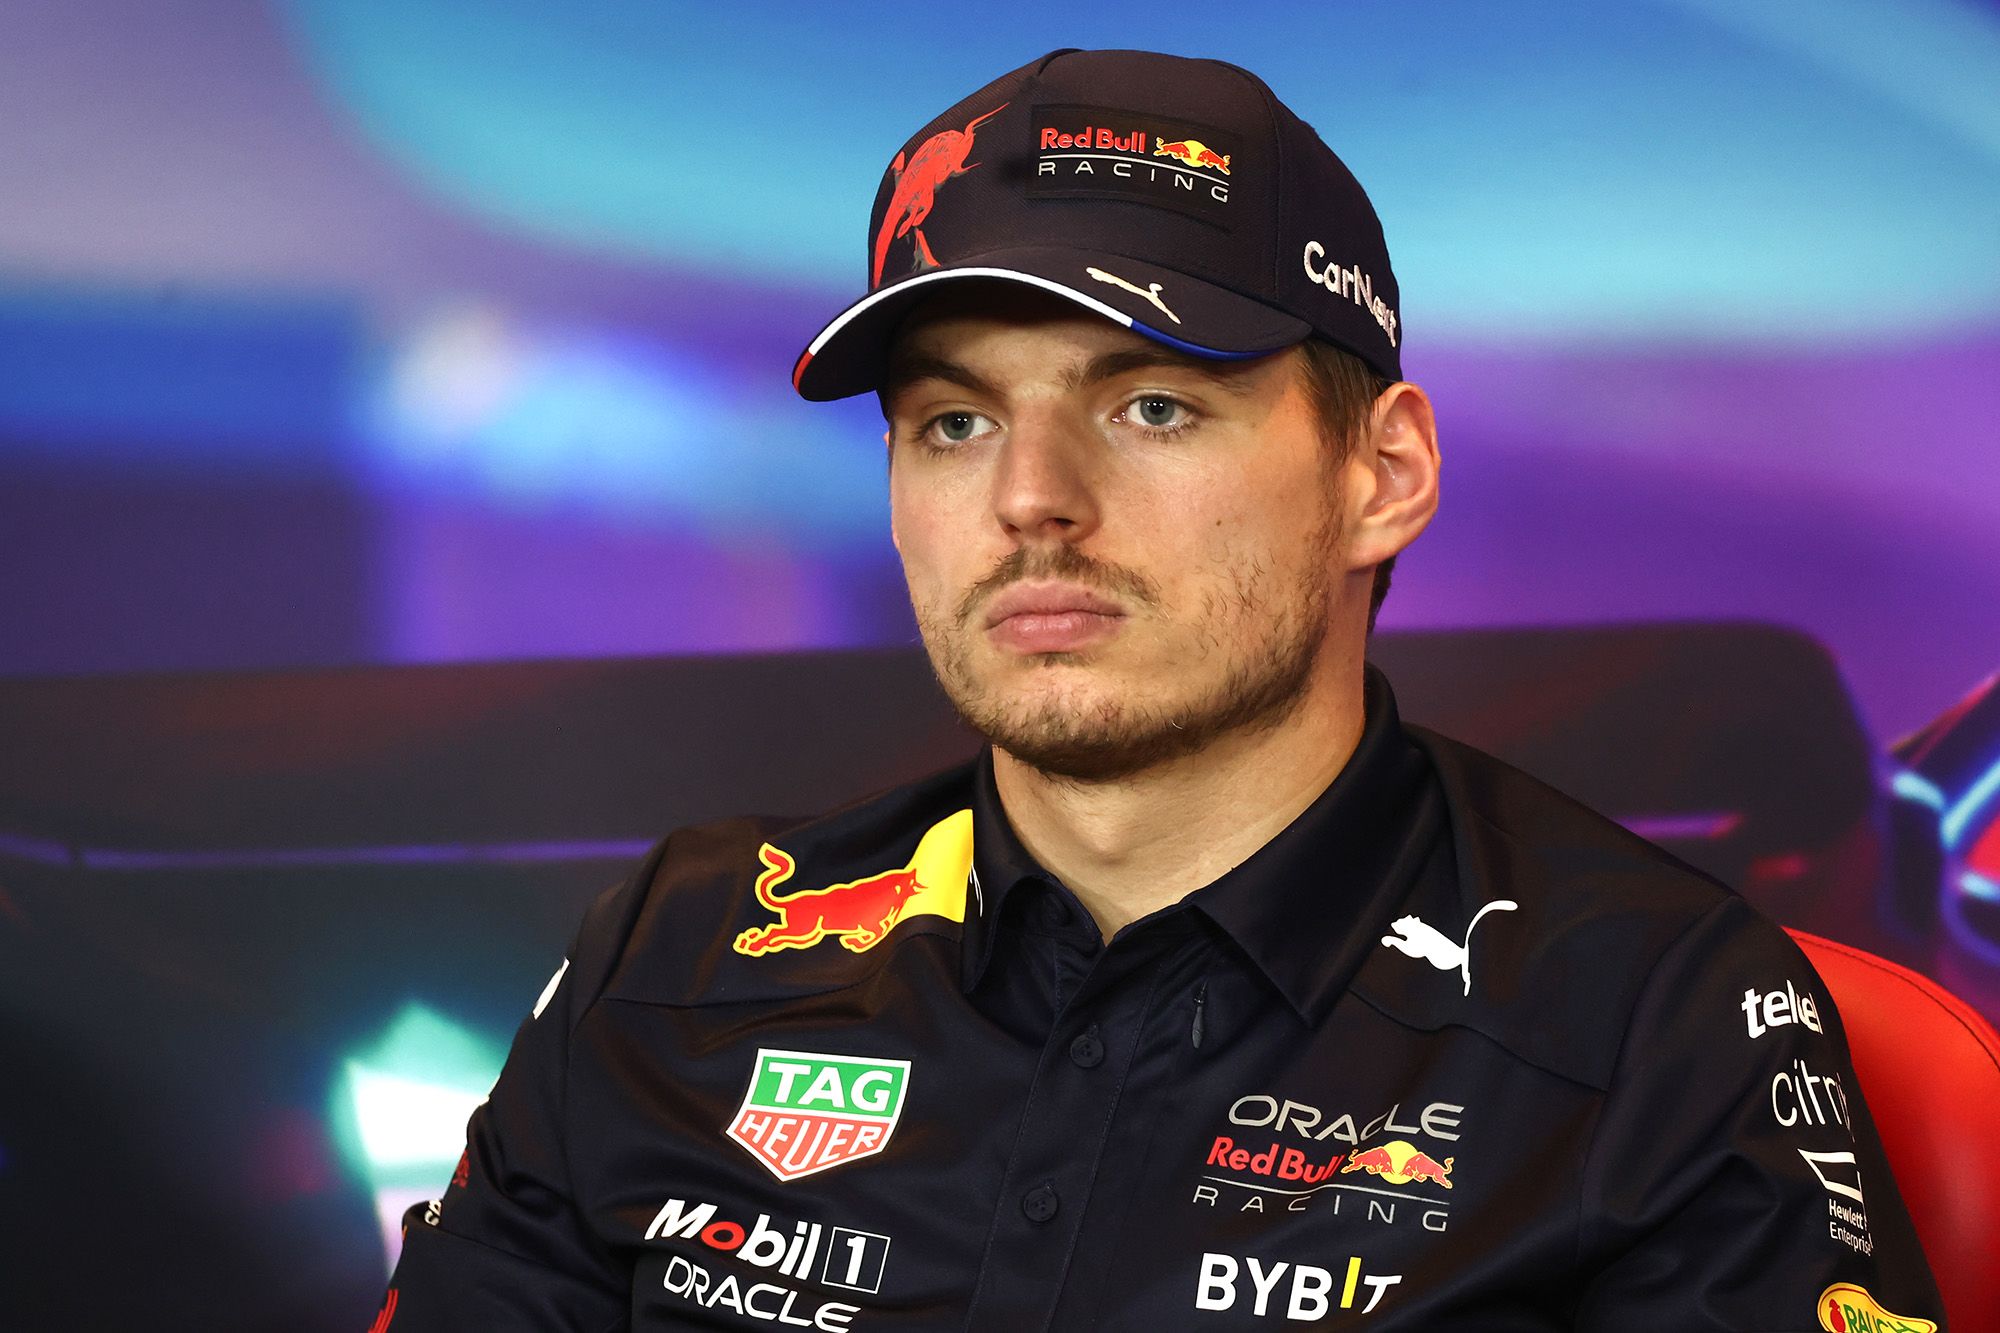 Max Verstappen takes pole position for the Abu Dhabi Grand Prix